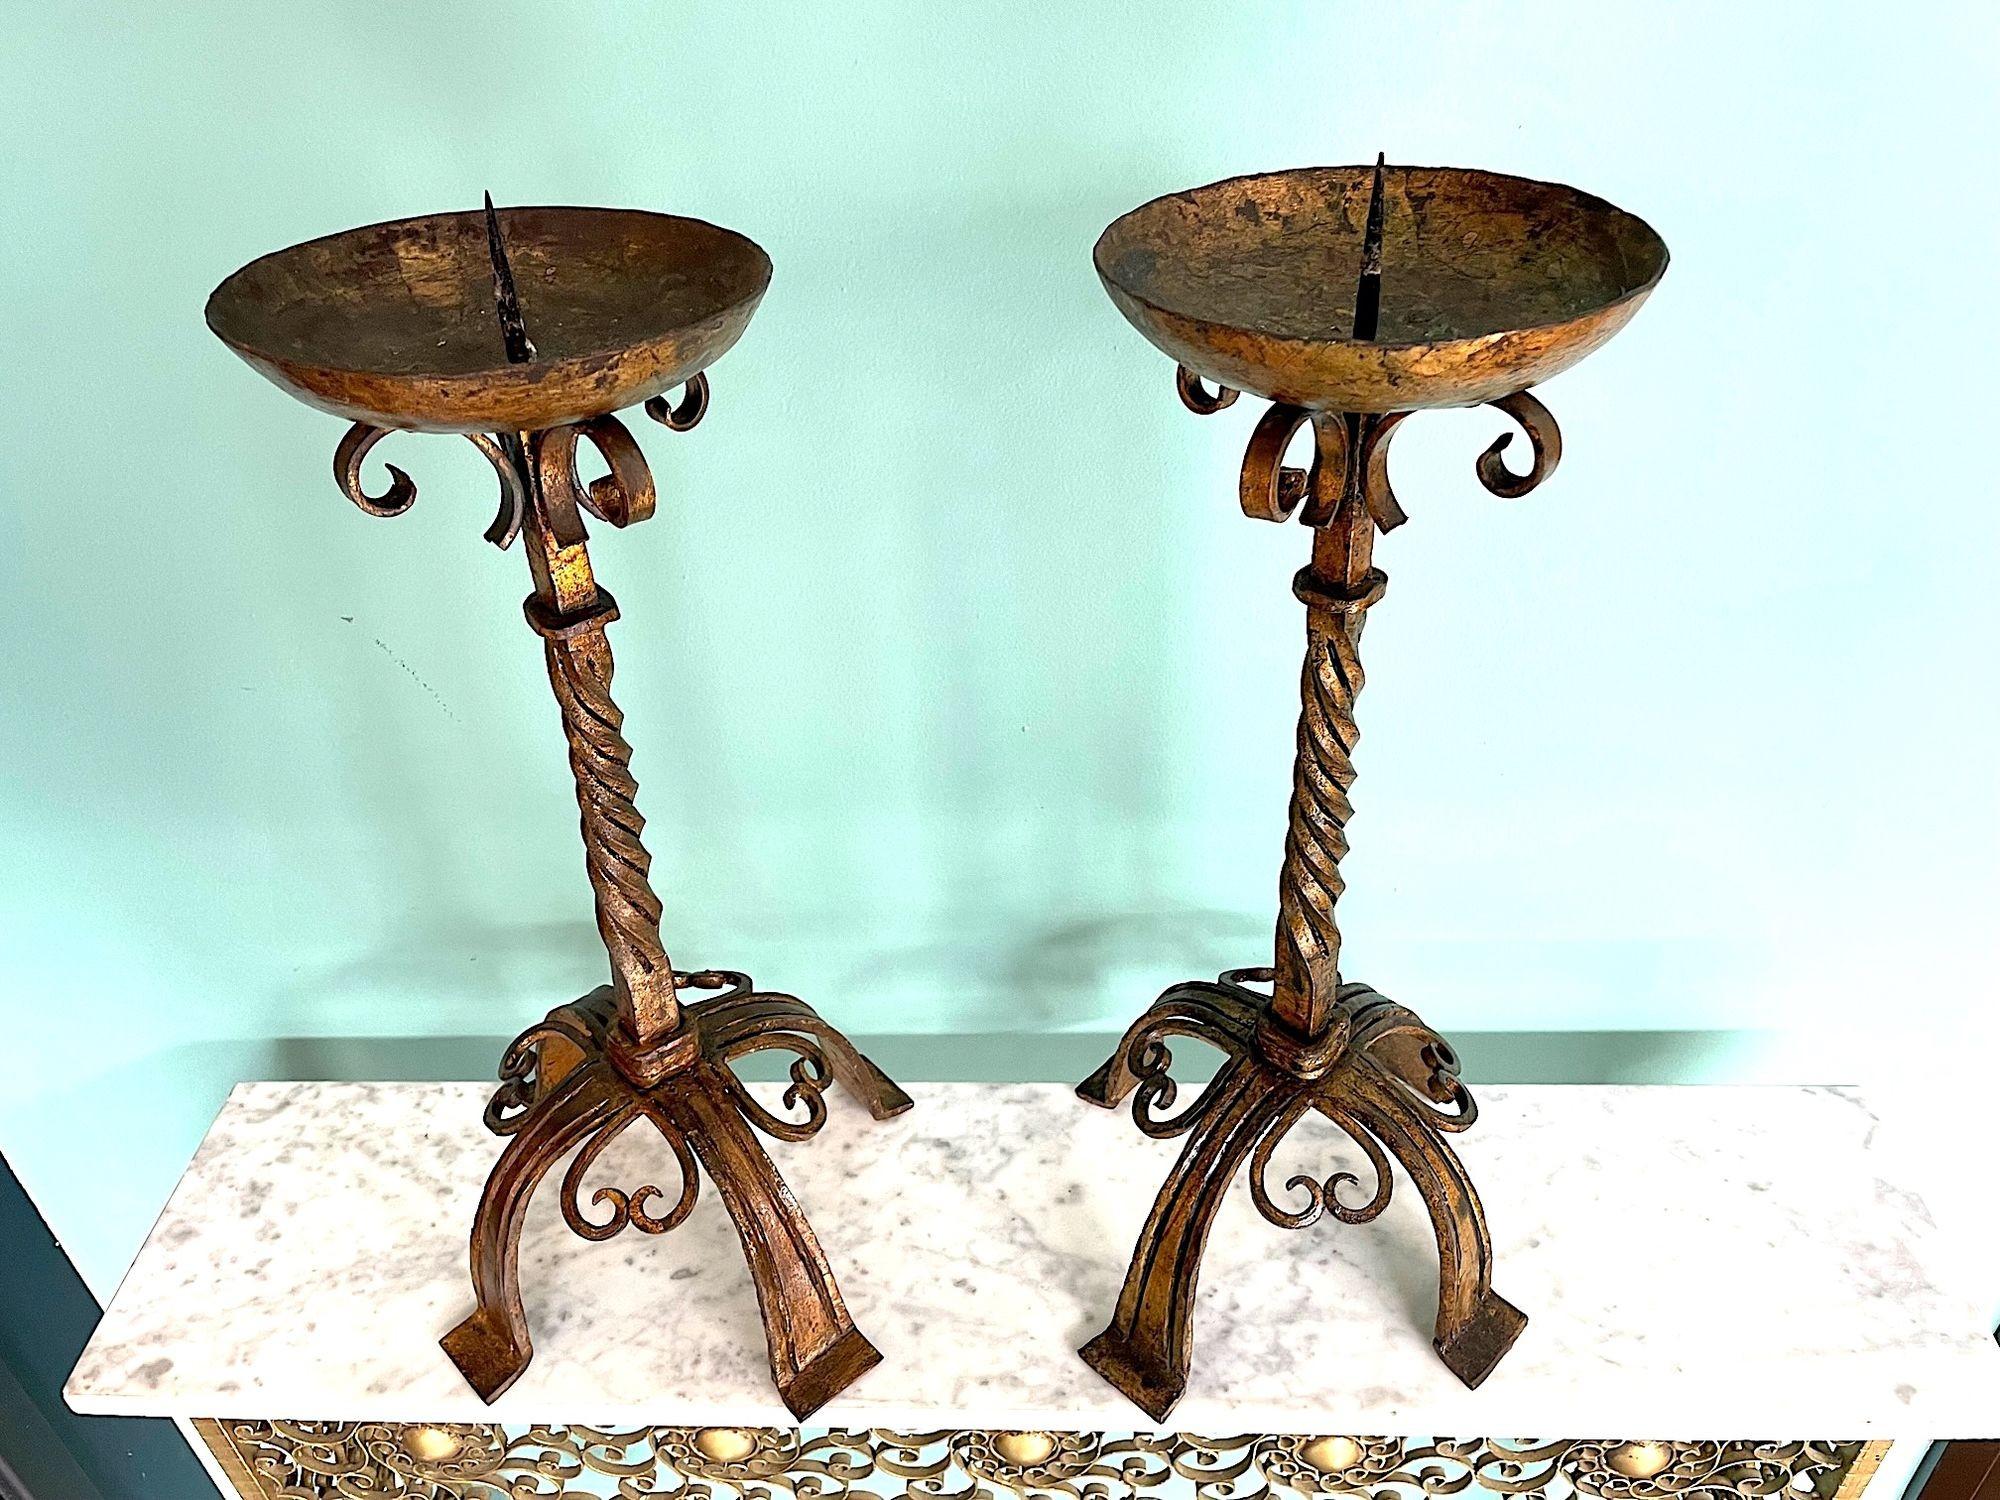 A pair of 1920s Spanish ecclesiastical gilt wrought iron candle sticks, each with ornate barley twist stem, scrolling and turned feet. 
OrigIn: Spain
Date: 1920s
Dimensions:
Height: 53 cm
Width:  26.5 cm
Depth: 26.5 cm
Condition: Good orignal